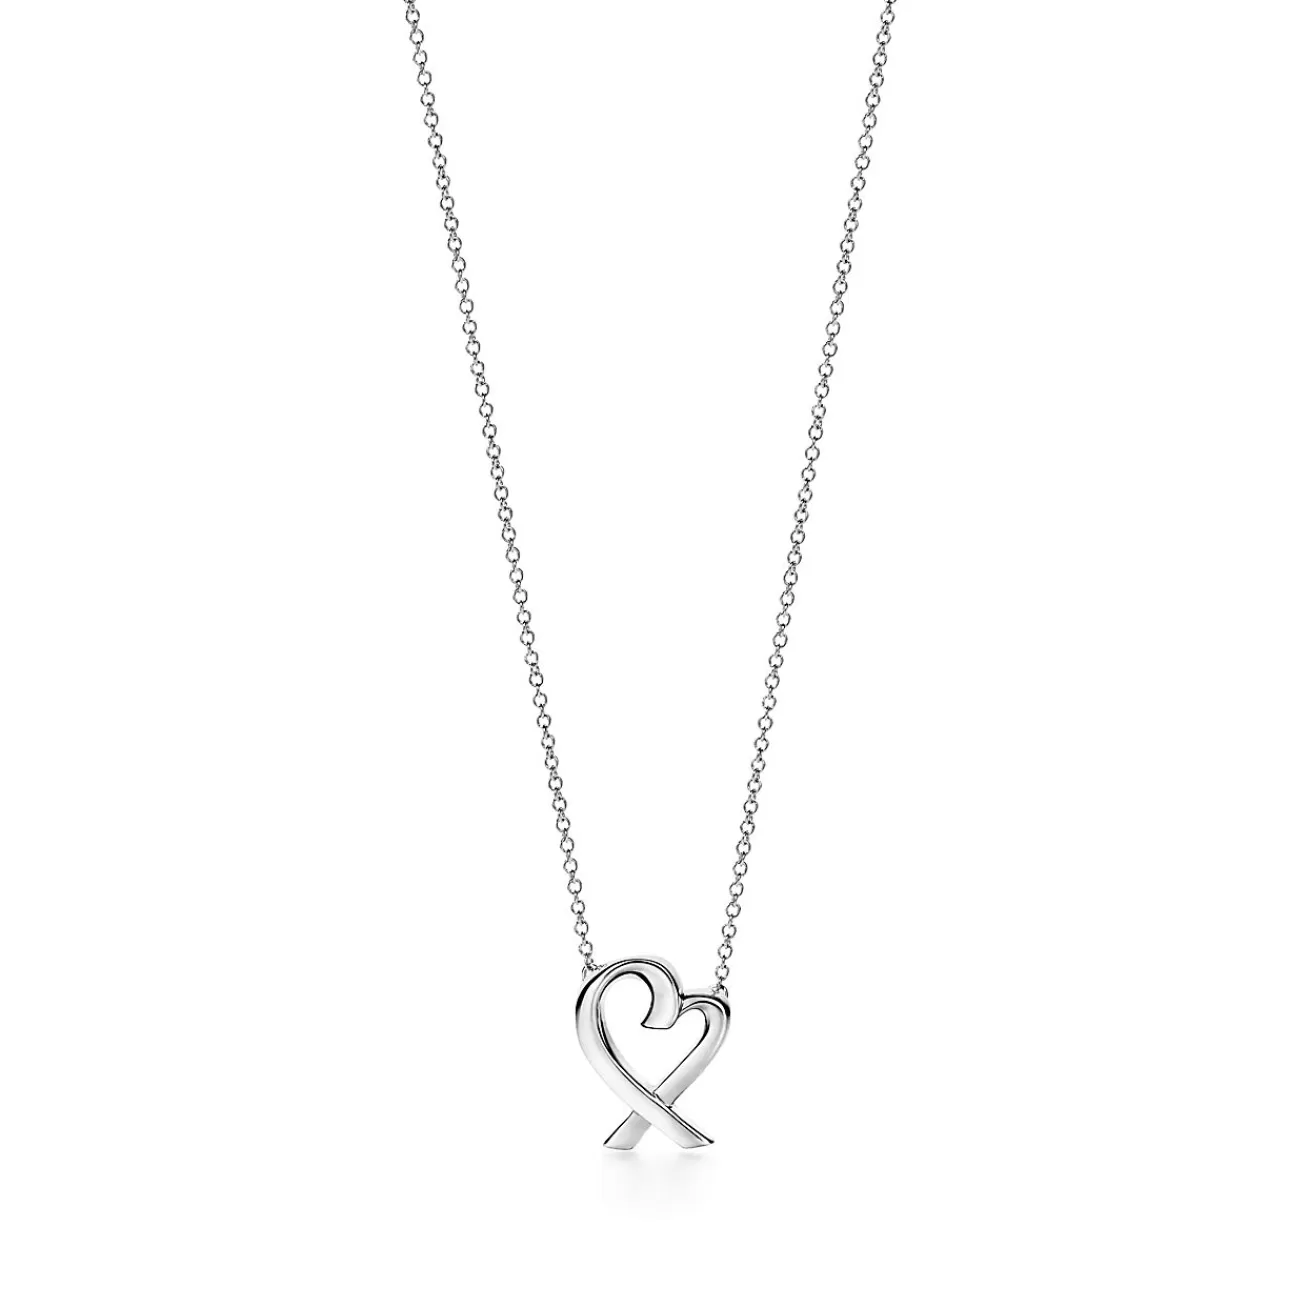 Tiffany & Co. Paloma Picasso® Loving Heart pendant in sterling silver, small. | ^ Necklaces & Pendants | Sterling Silver Jewelry